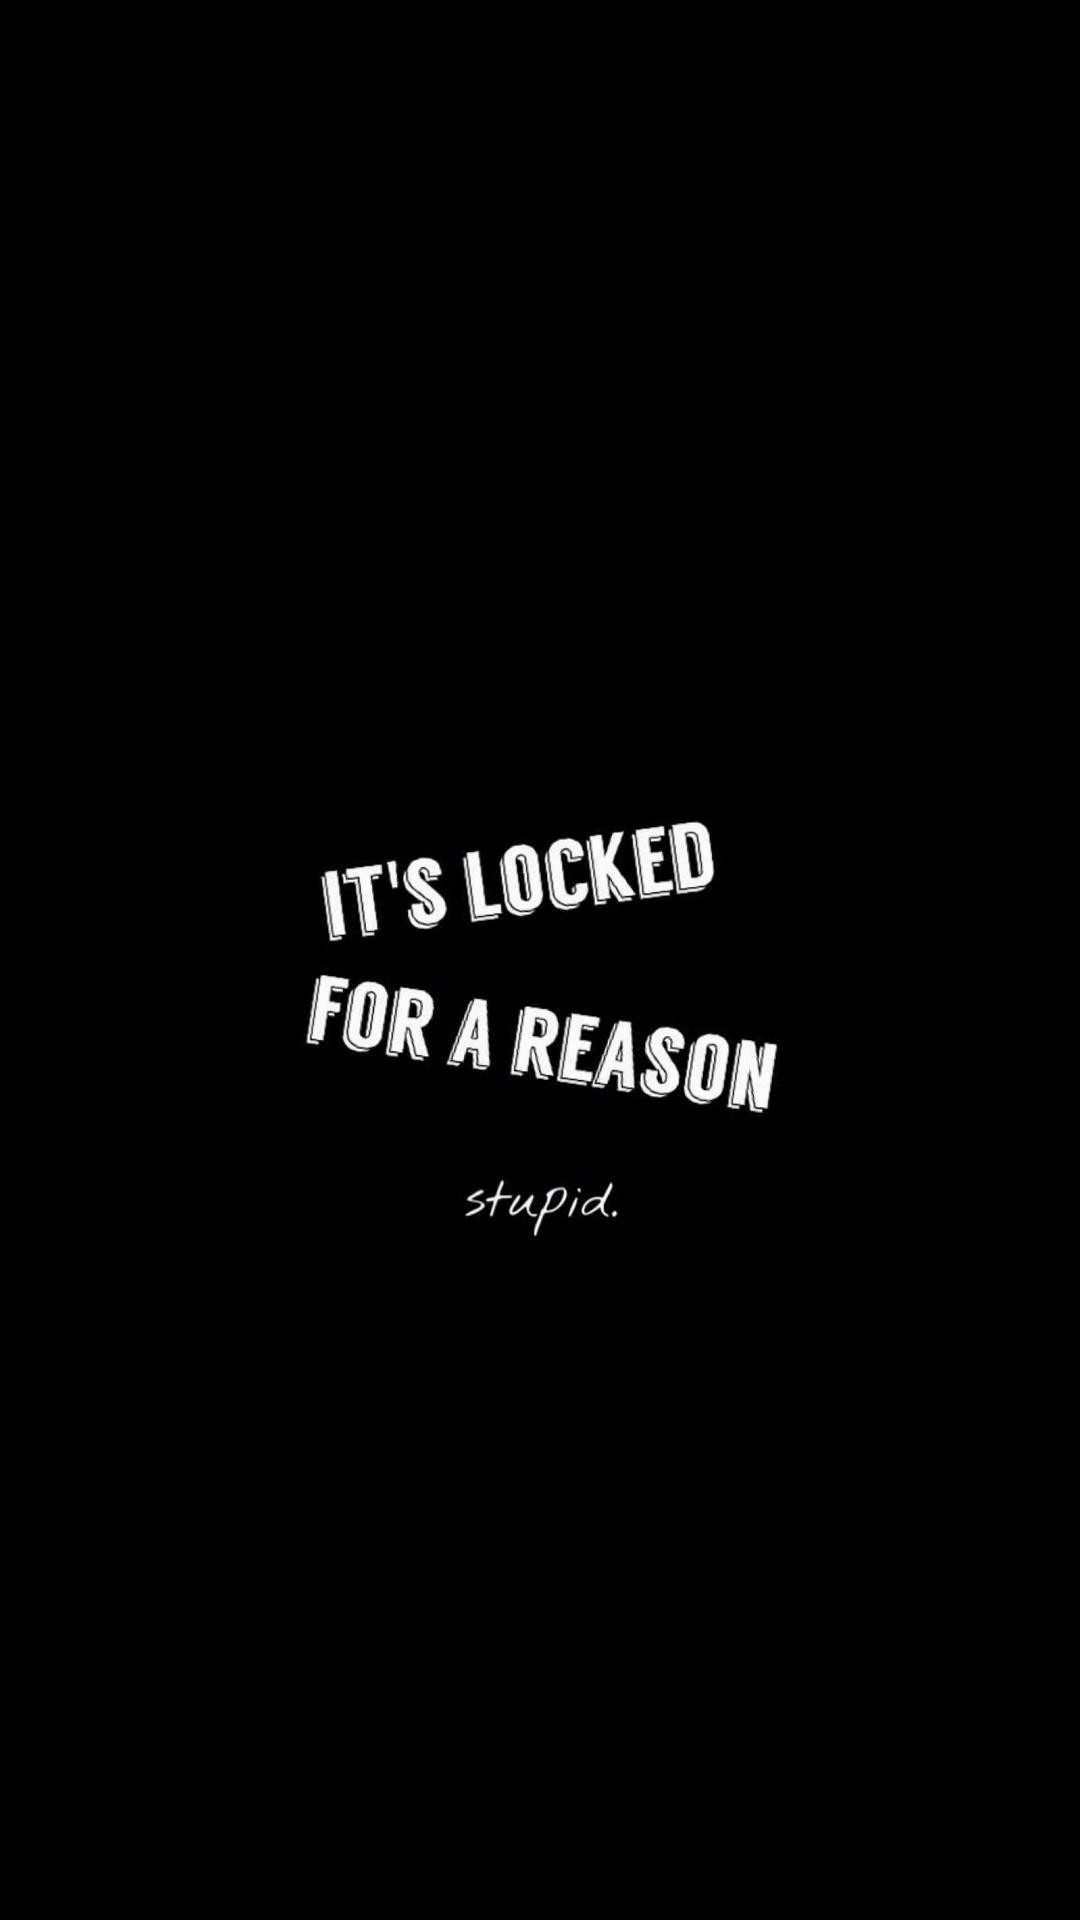 Locked For A Reason Stupid Android wallpaper wp6407332